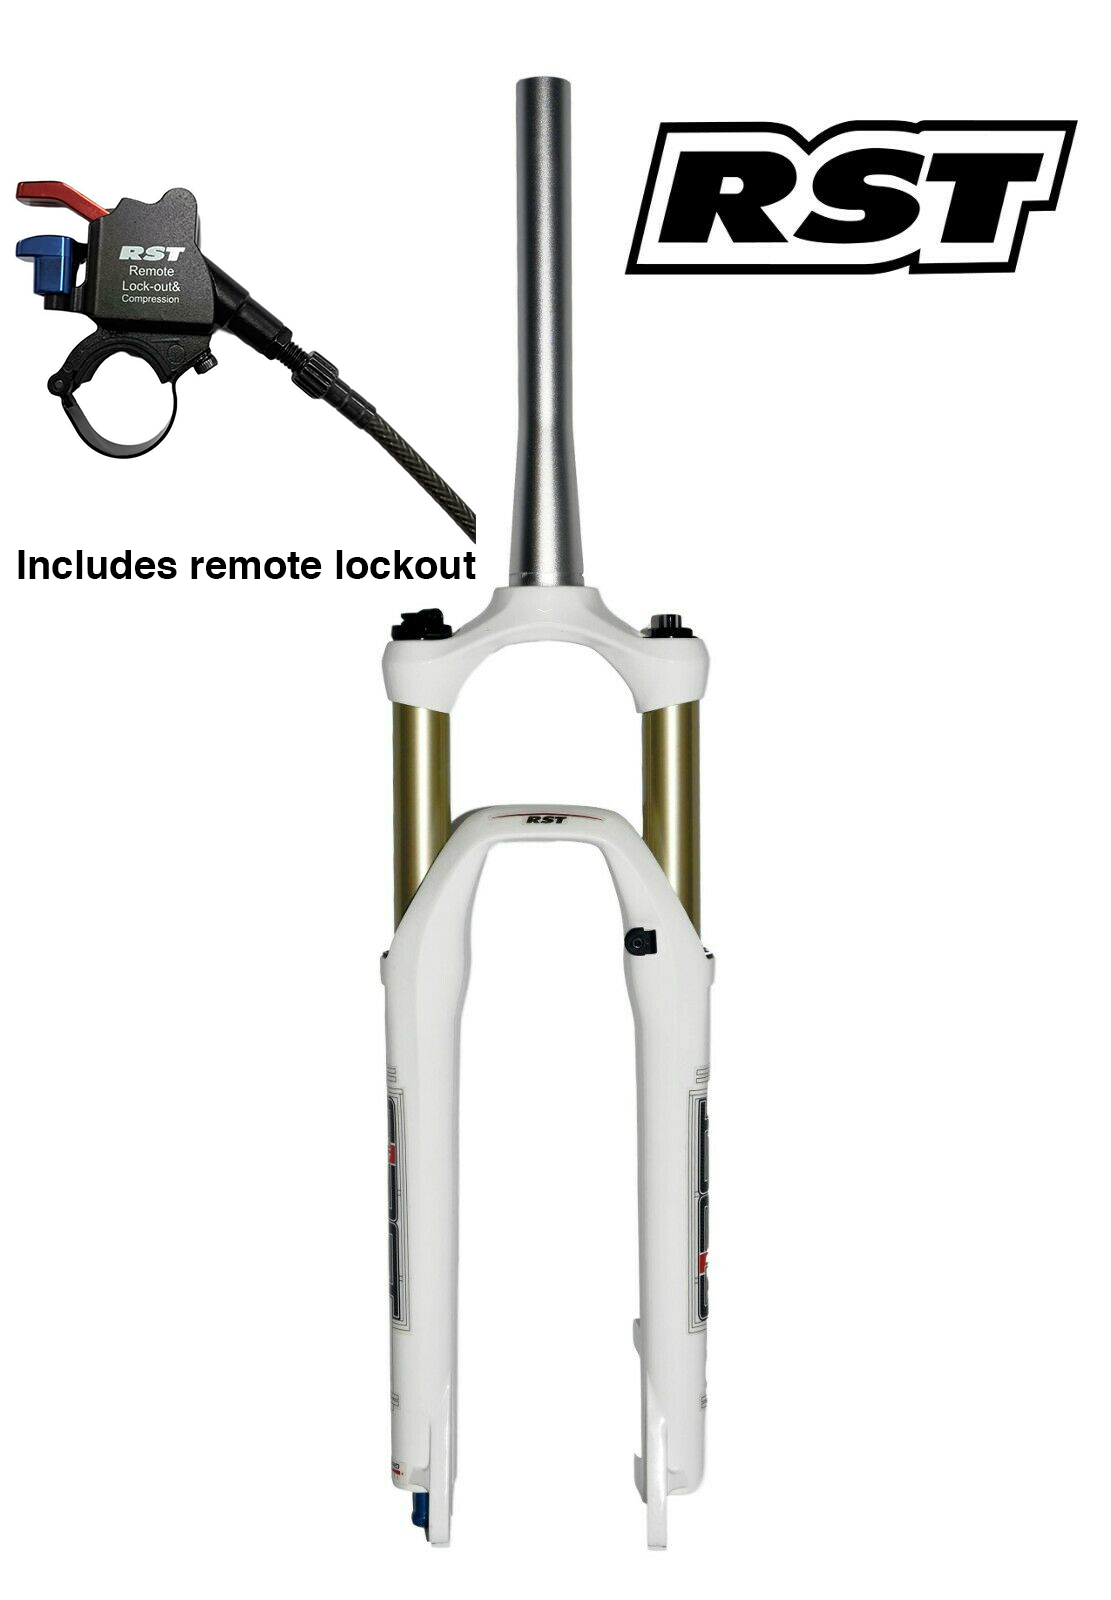 RST First 30 26" MTB Straight Air Fork - 100mm Travel - Remote Lockout - White - Sportandleisure.com (6968131092634)